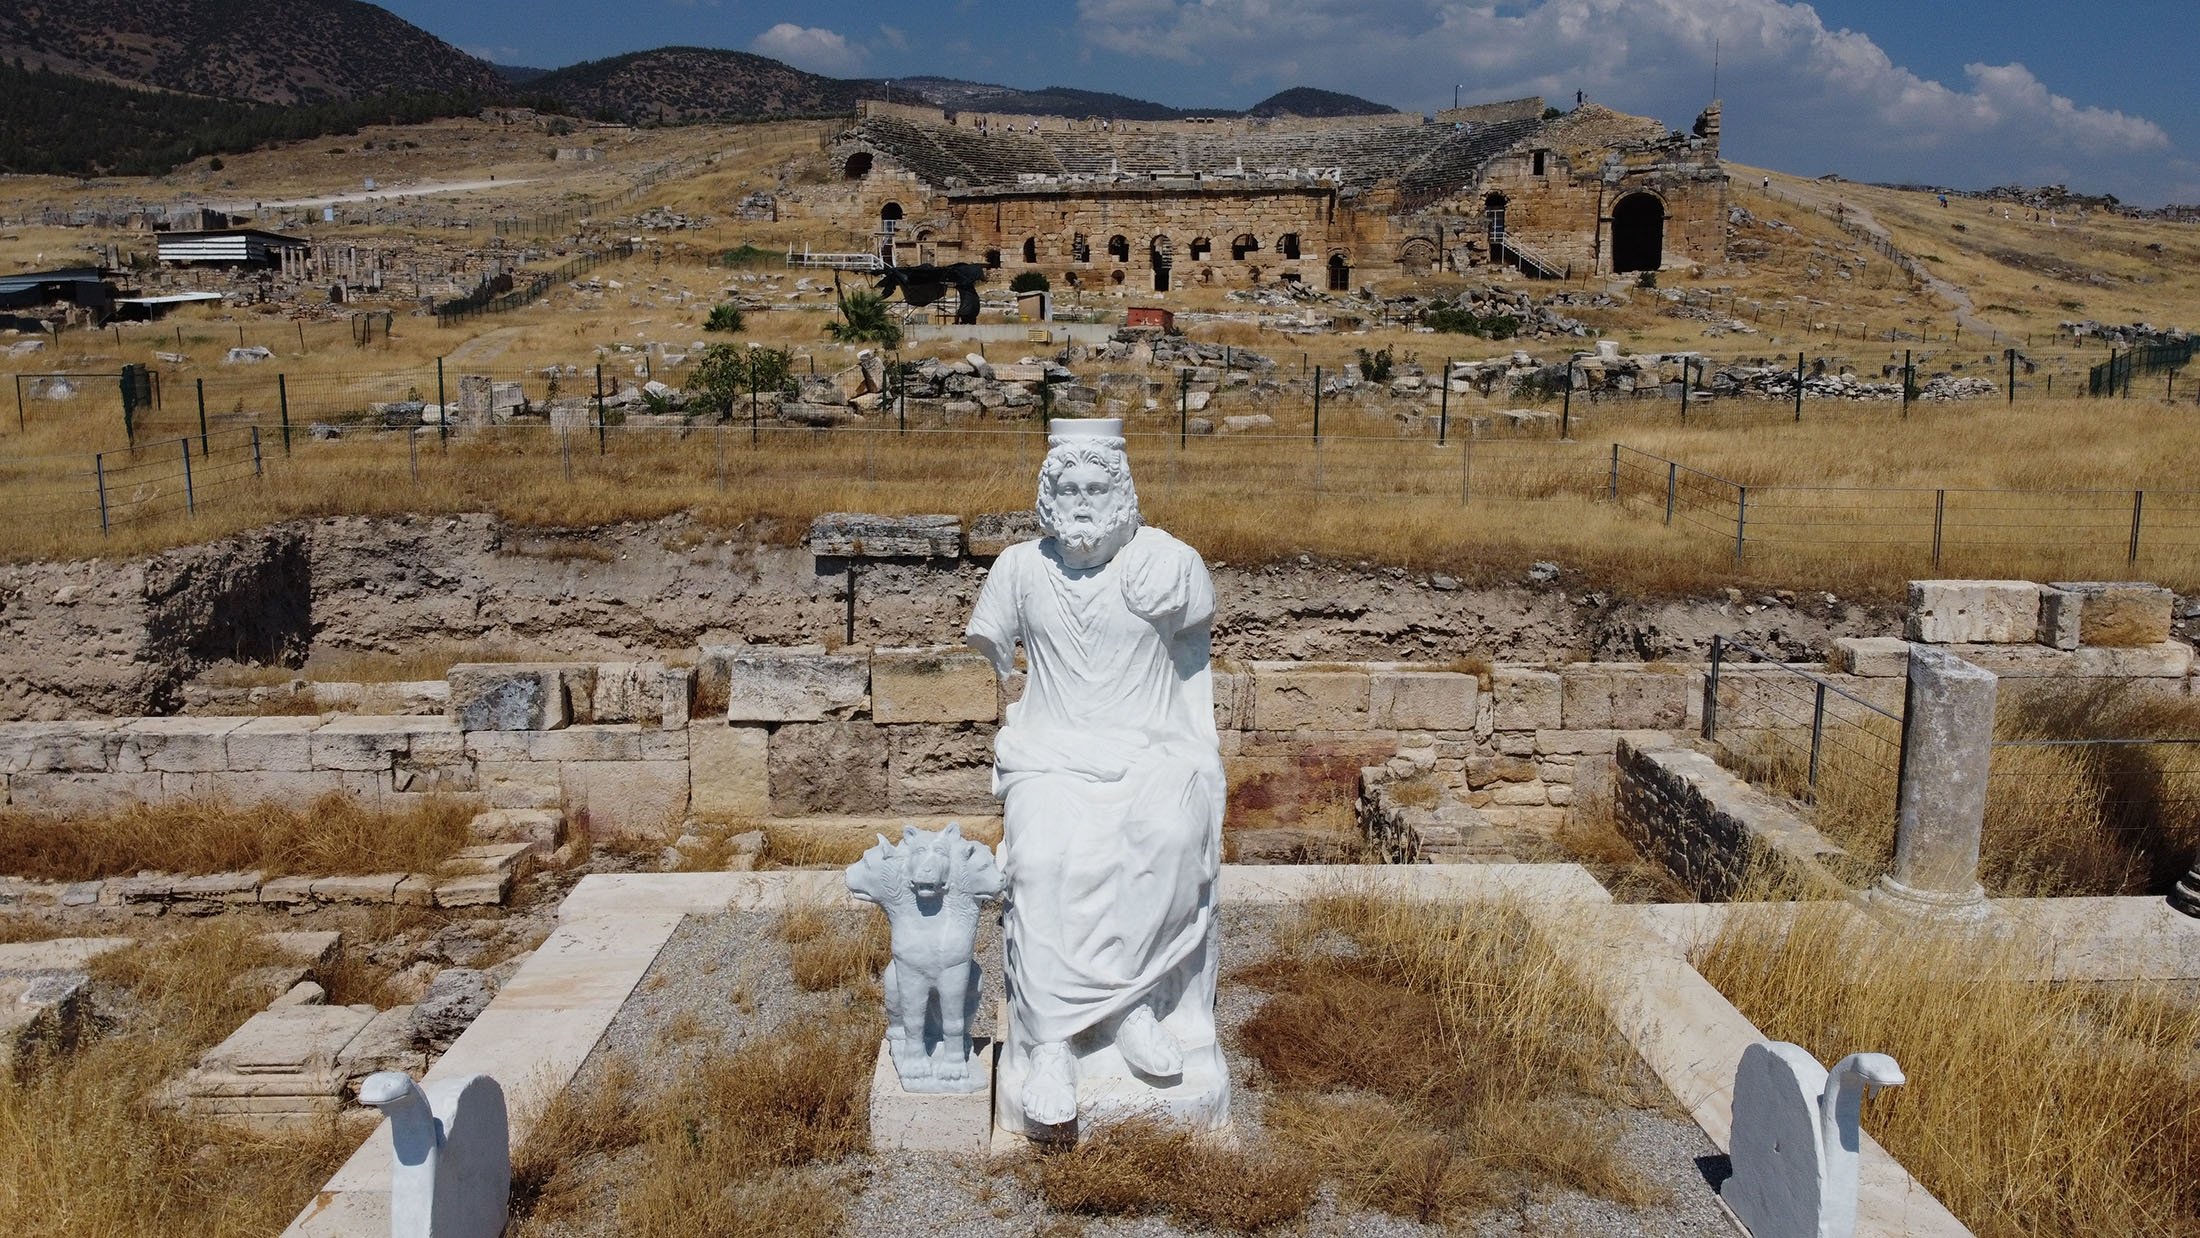 A statue rises in the center of the ancient city of Hierapolis in Pamukkale, Denizli, Turkey, July 23, 2021. (AA Photo)